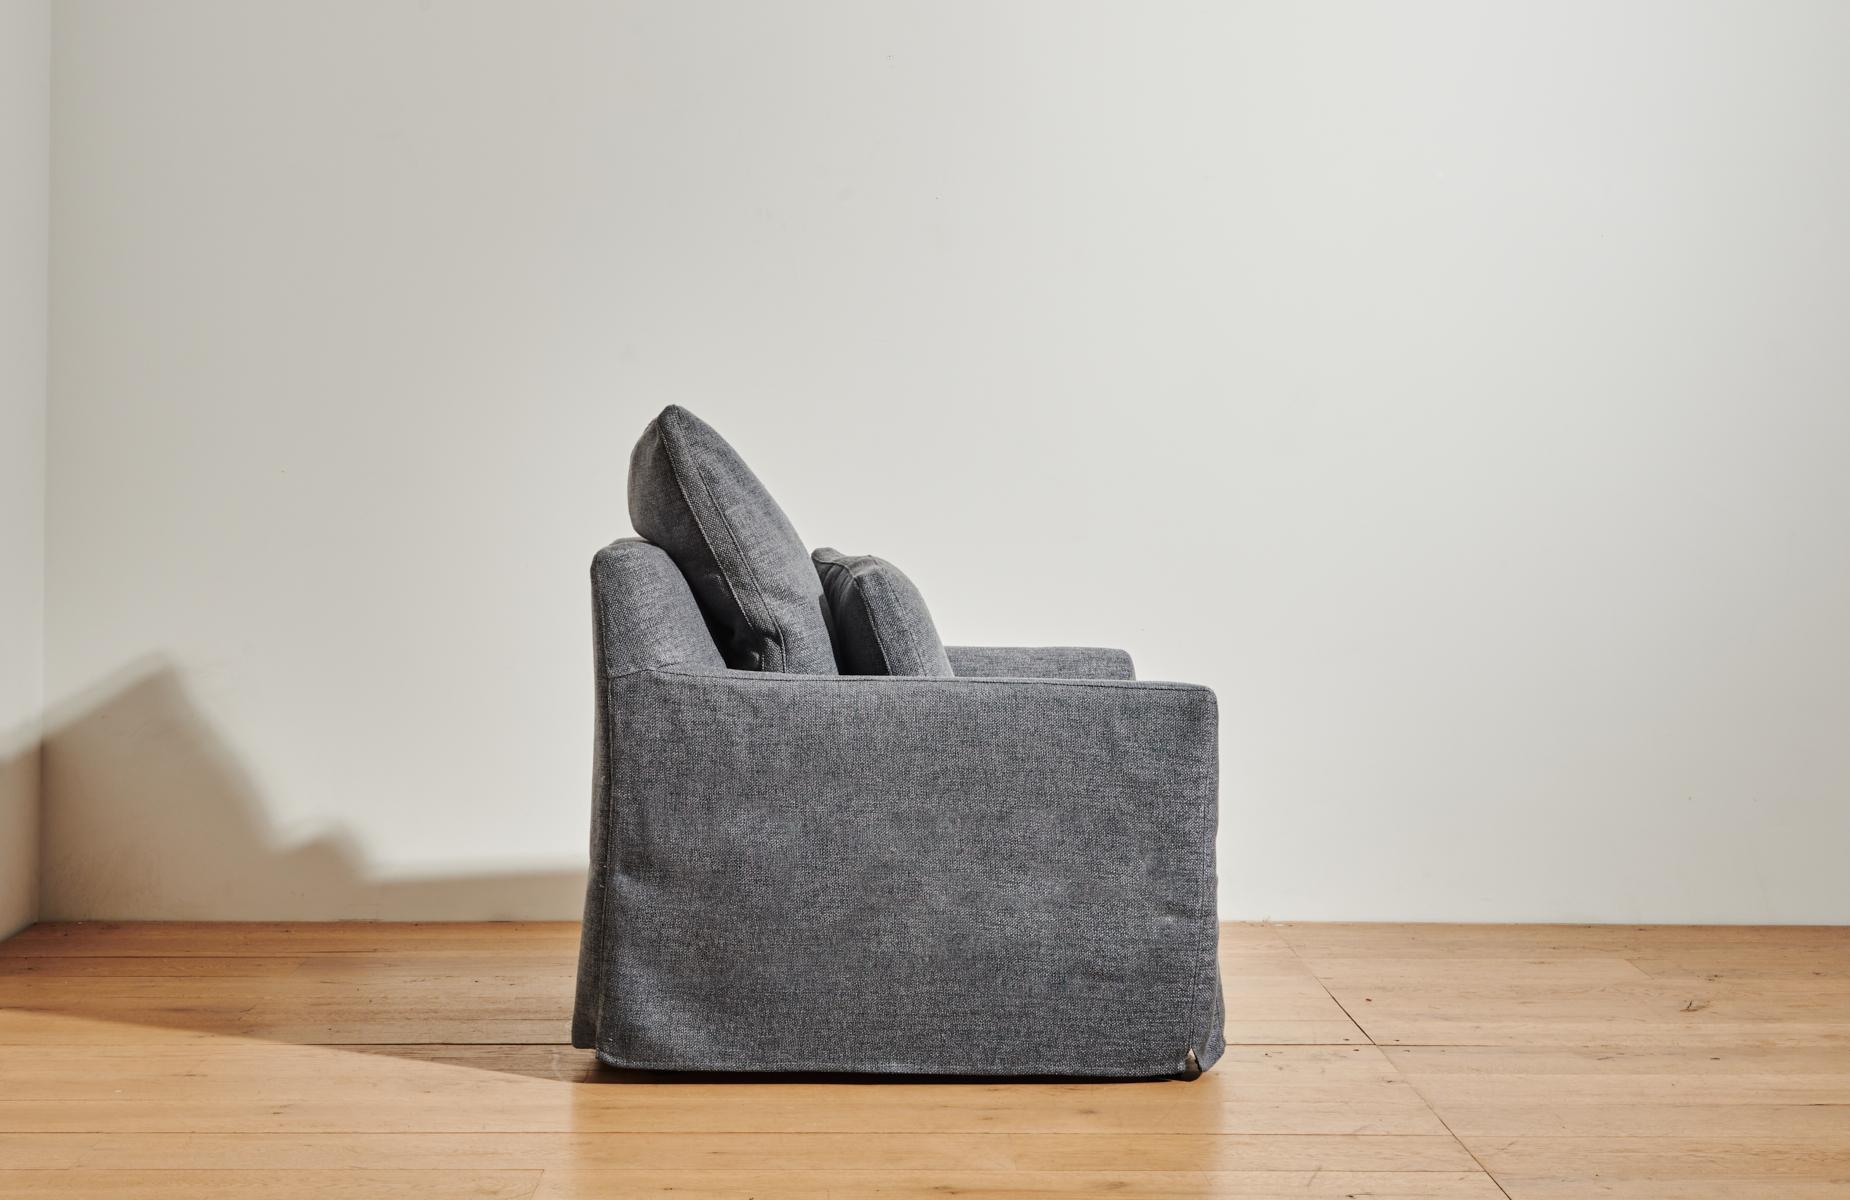 The Cisco Brothers slipcovered Dream Chair in new dark grey fabric, Bellamy Slate, combines comfort, quality craftsmanship, and durable, eco-friendly manufacturing to result in a stylish organic modern lounge chair for your living room. 

Cisco is